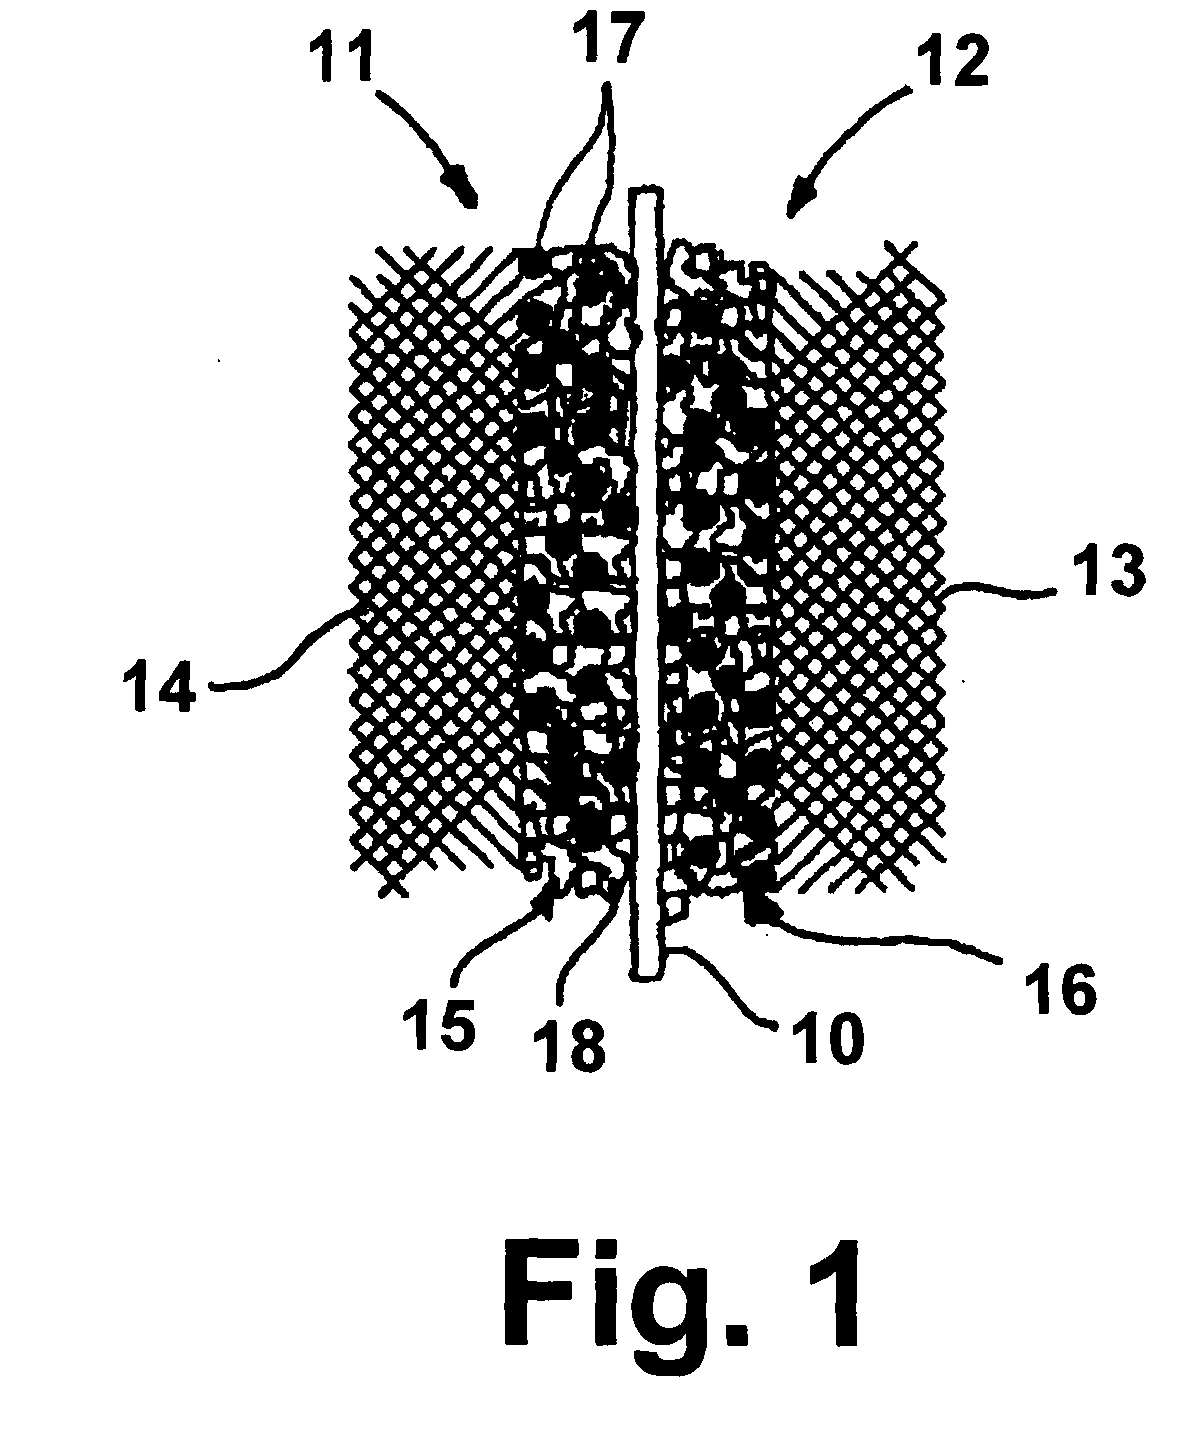 Direct methanol fuel cell electrode catalyst